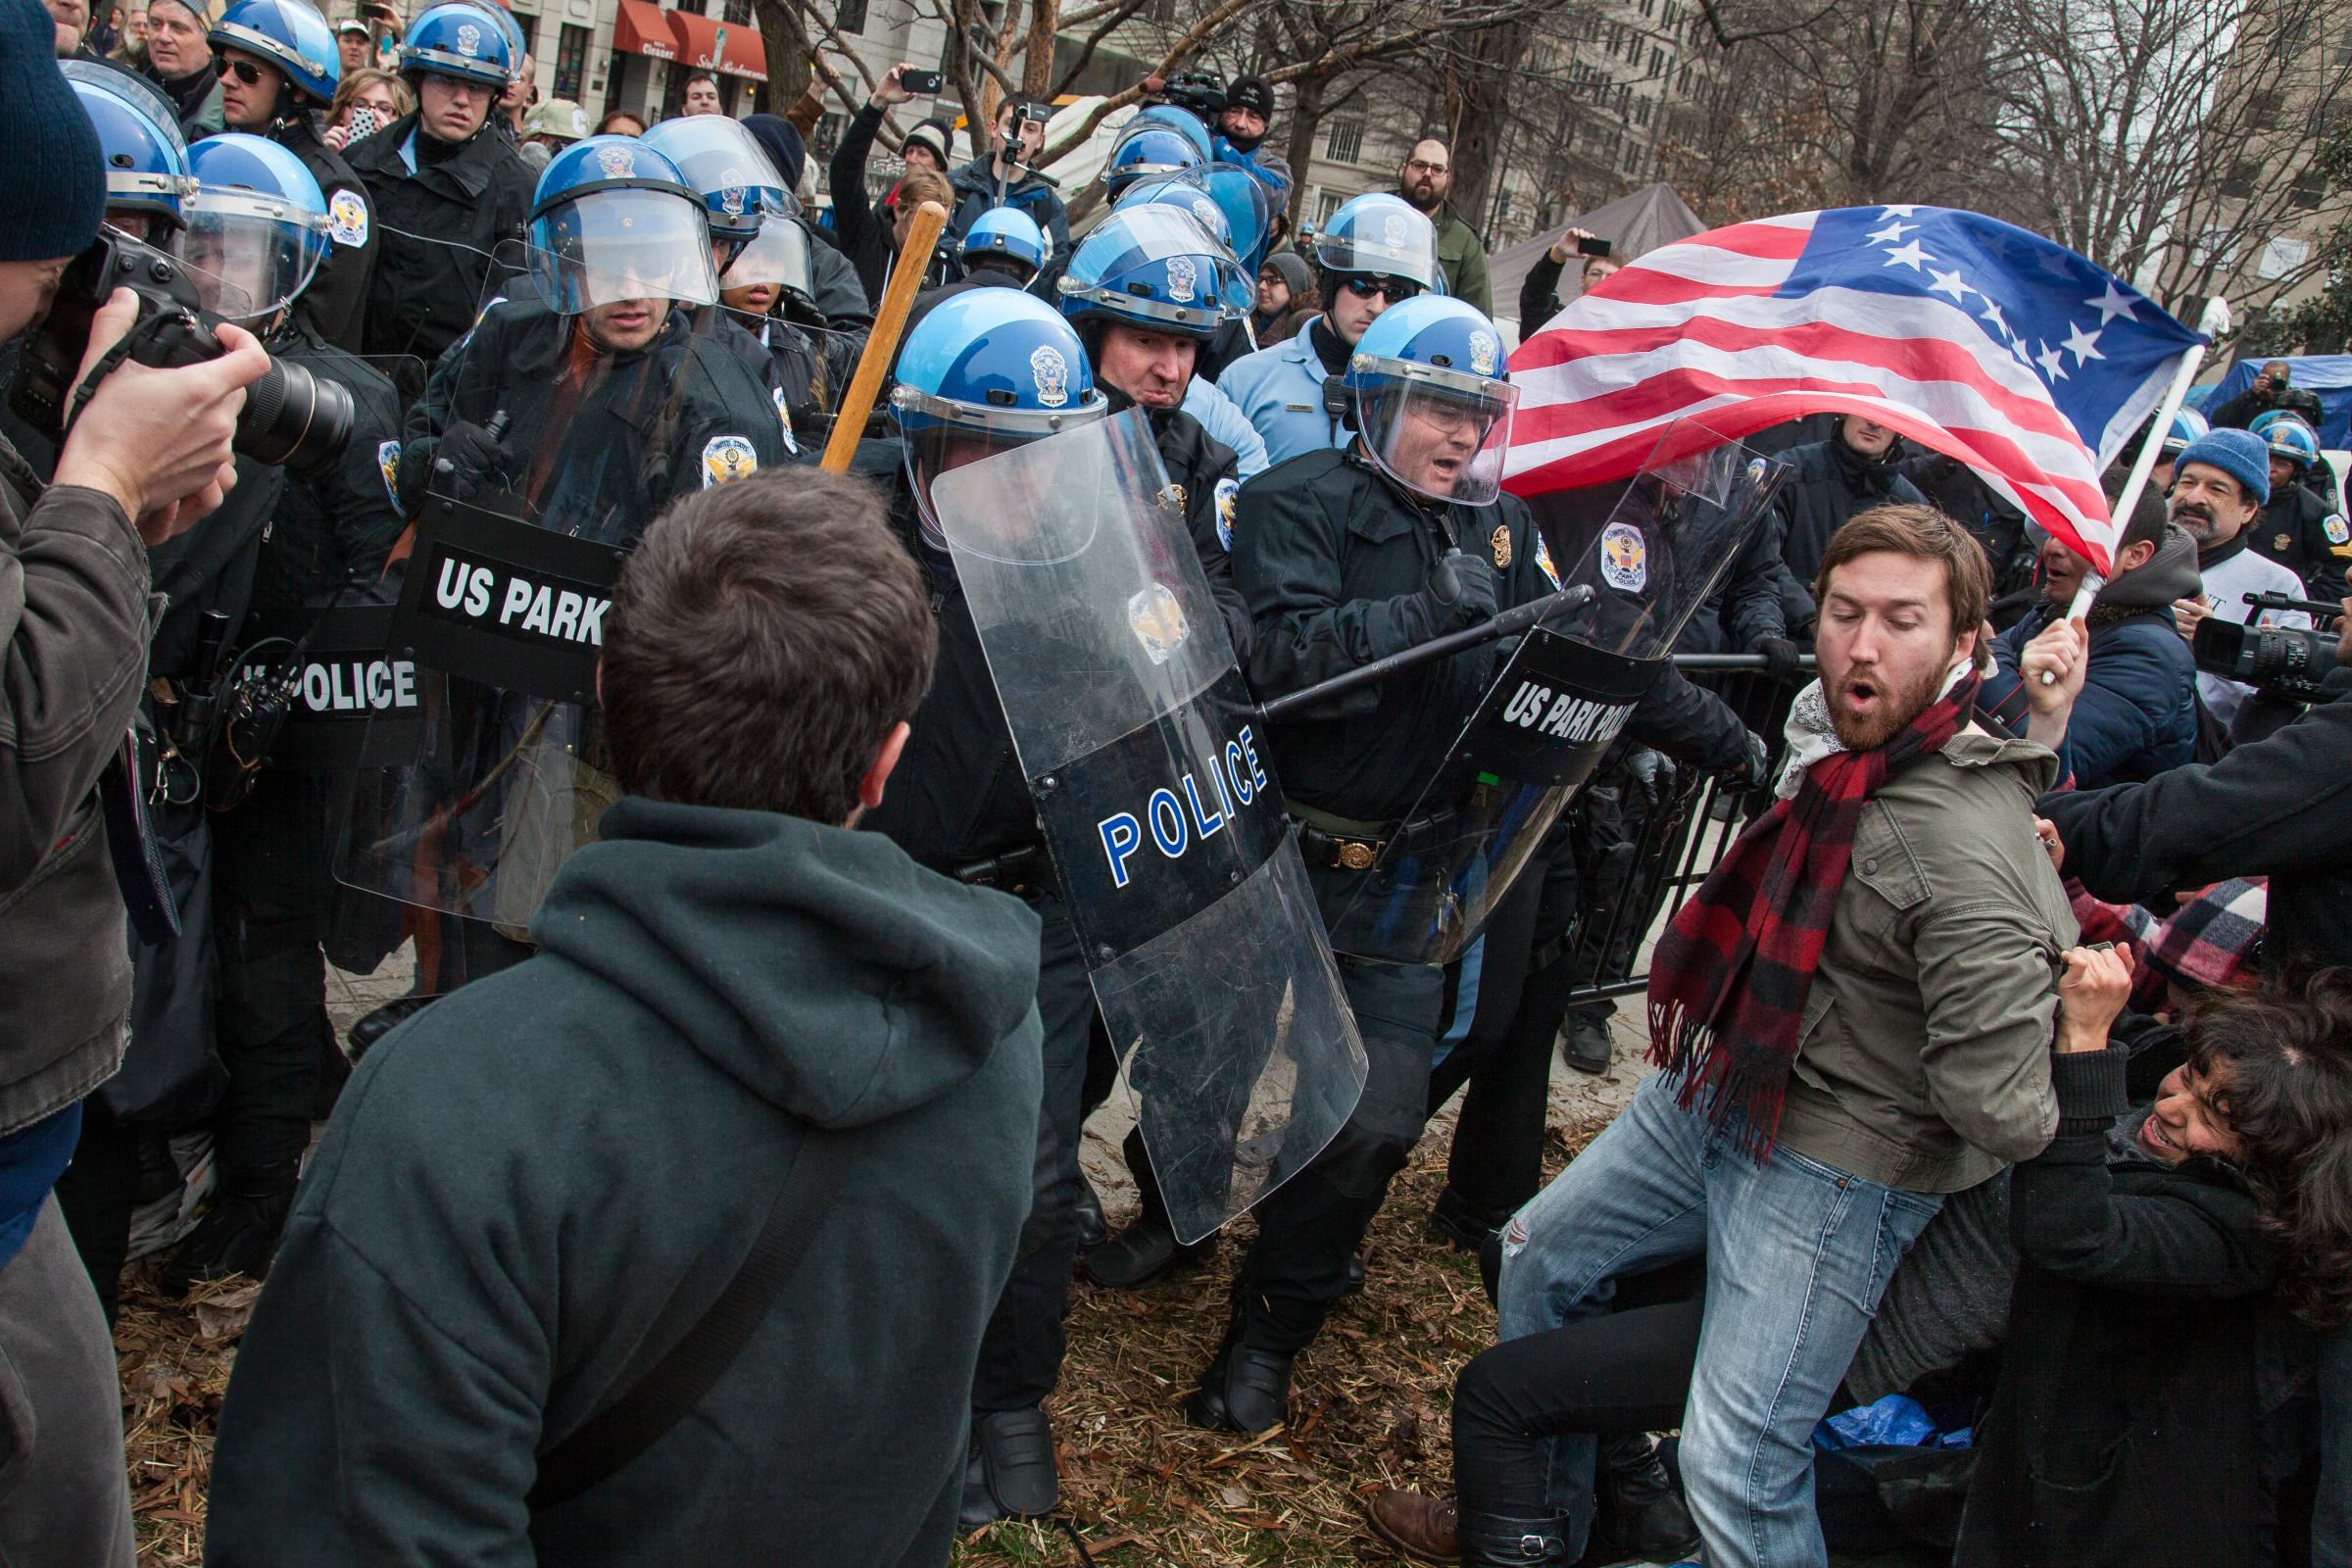 Occupy D.C. protestors resist U.S. Park Police clearing out areas of McPherson Square which the protestors have been occupying and living for the...